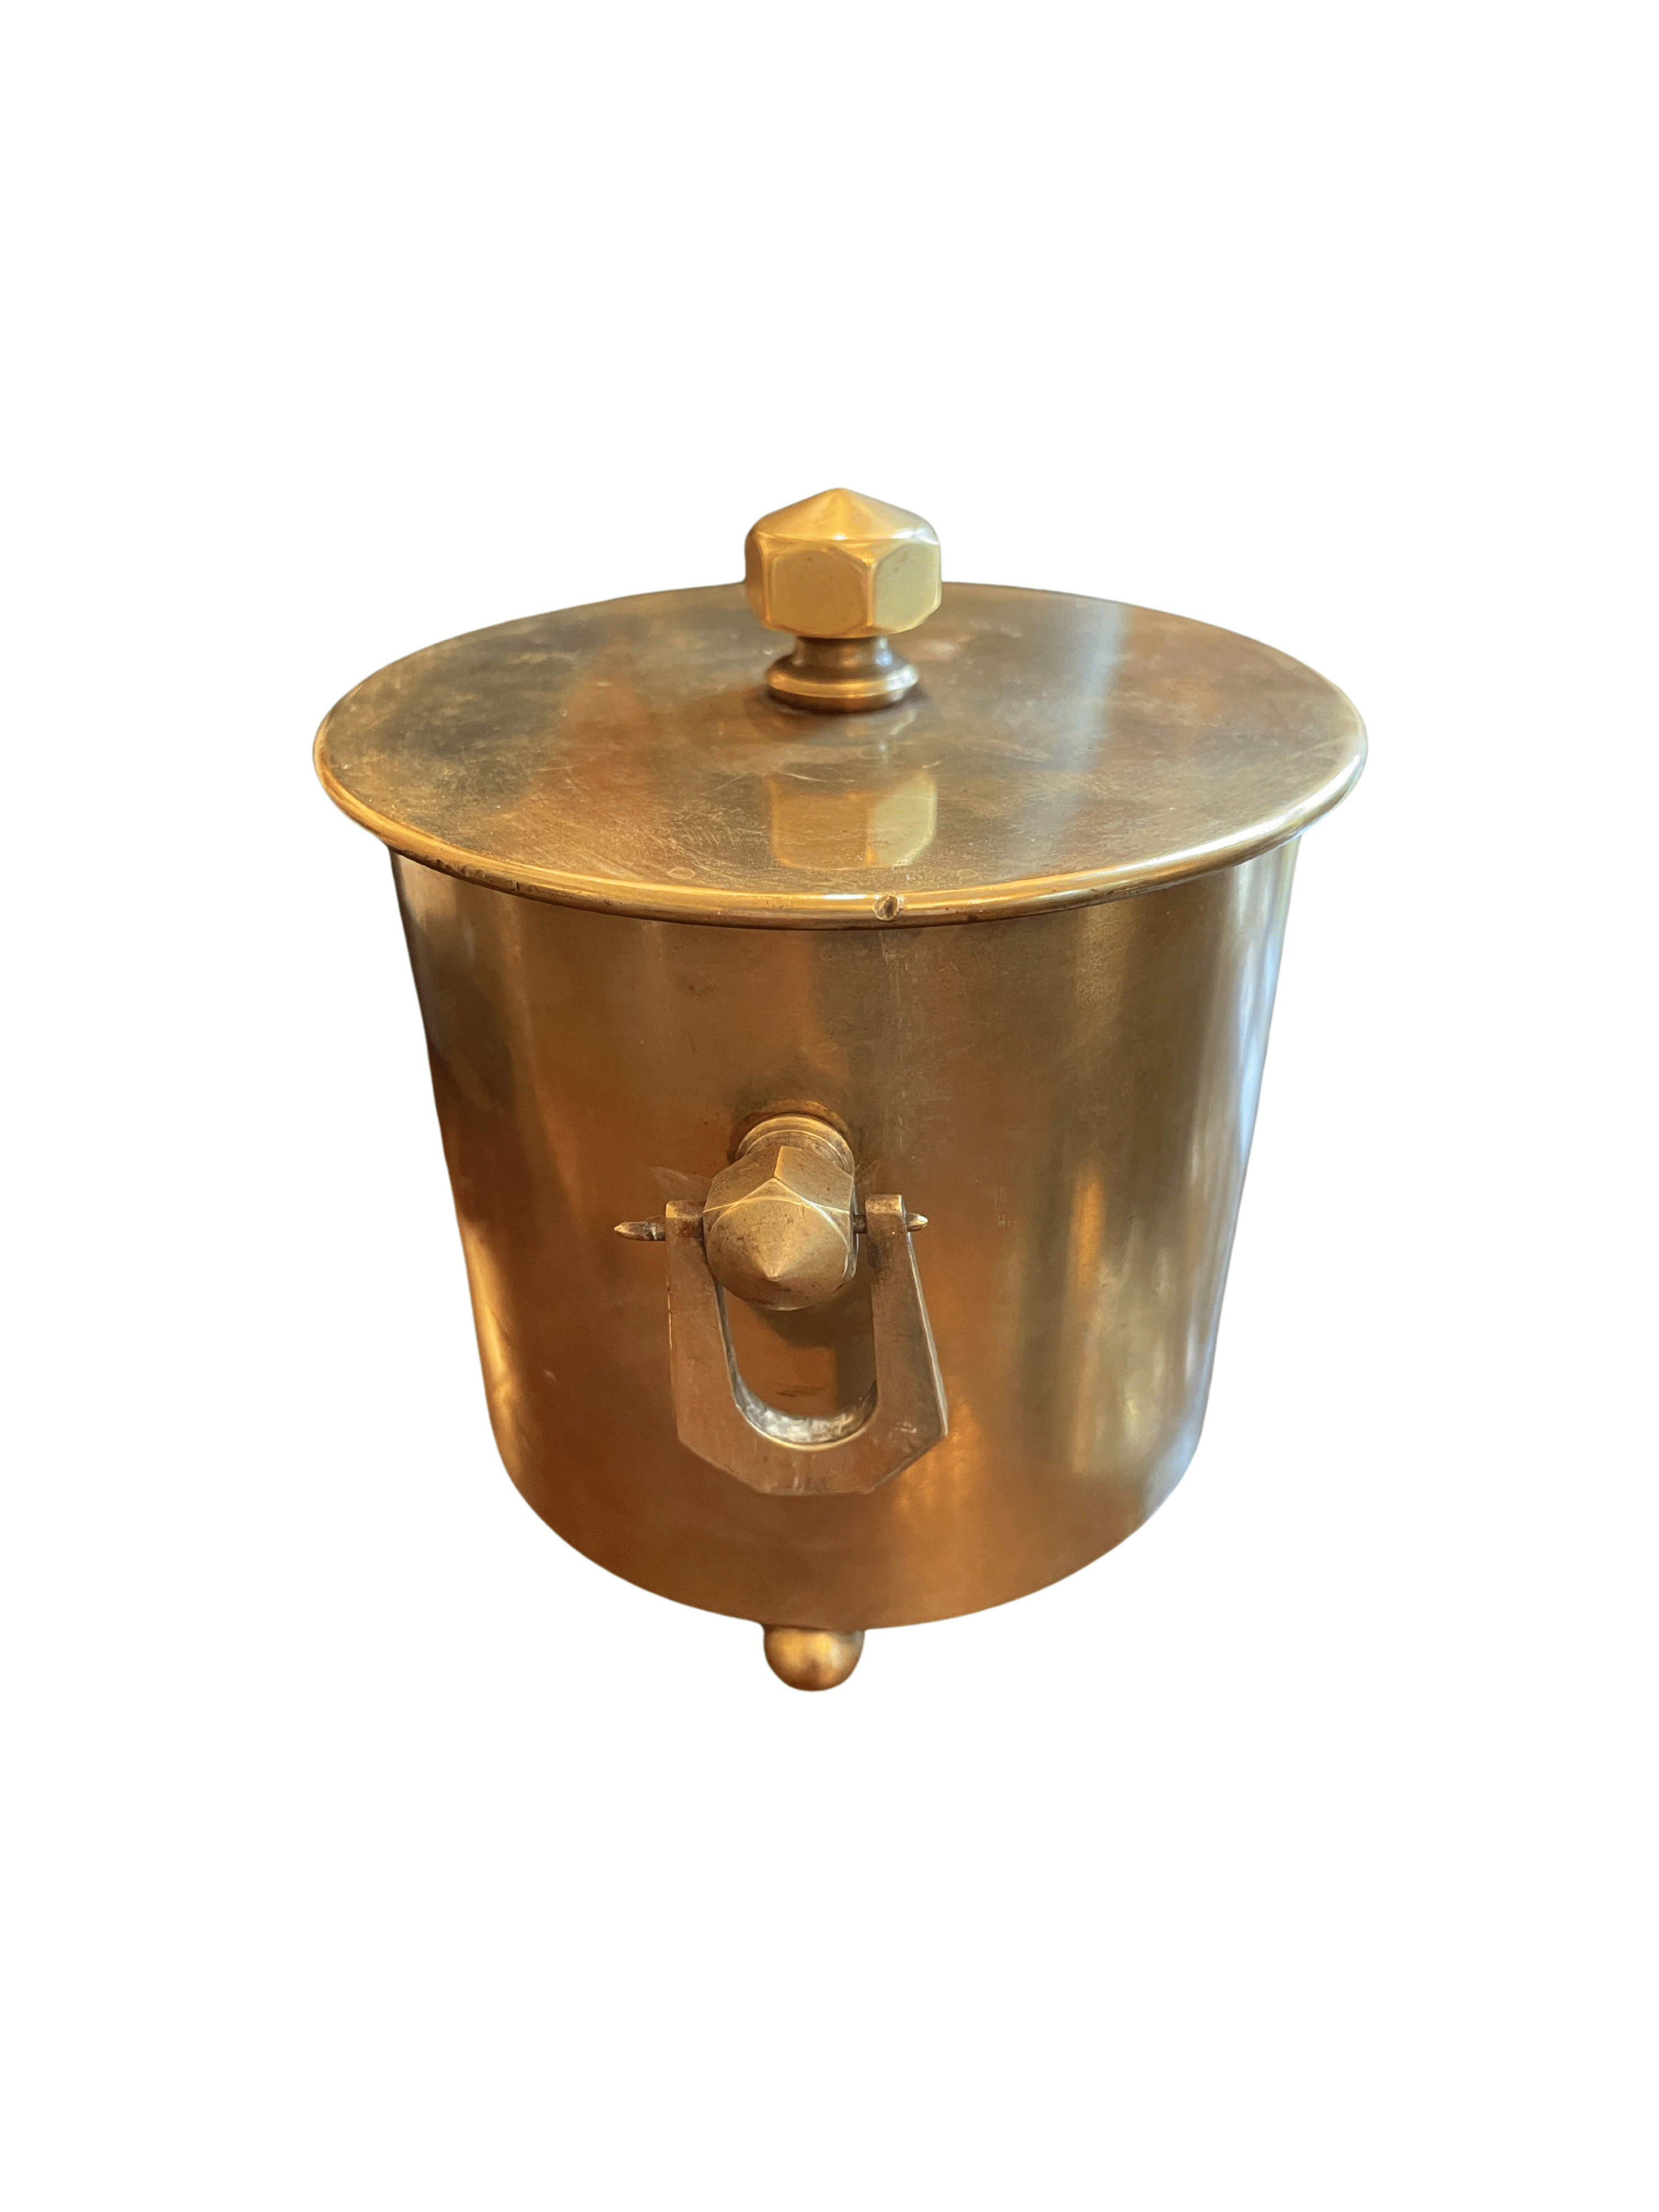 Vintage Brass Tea Caddy With Copper Lining